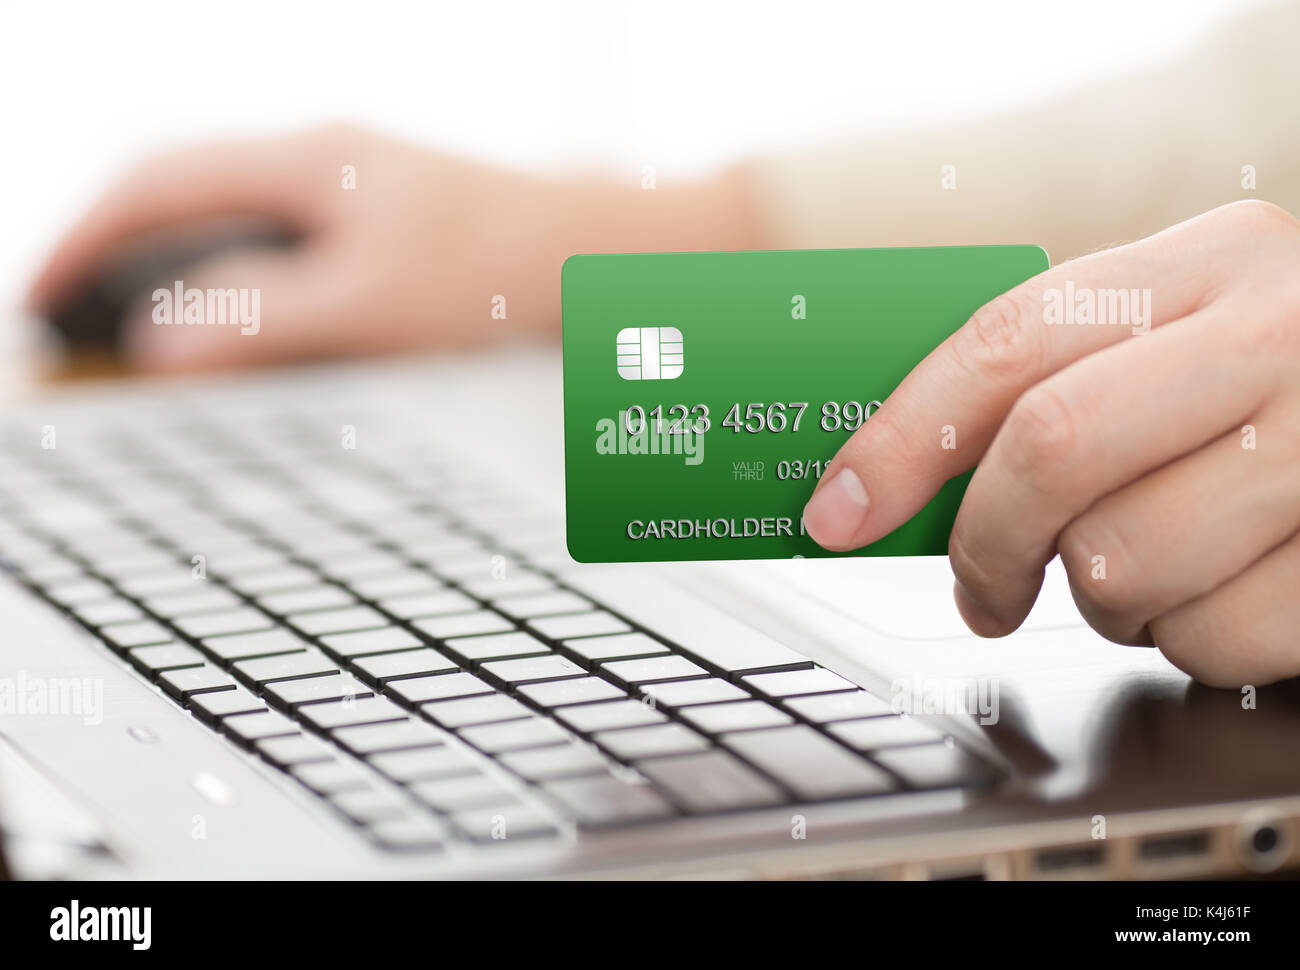 Man holding green payment card Stock Photo